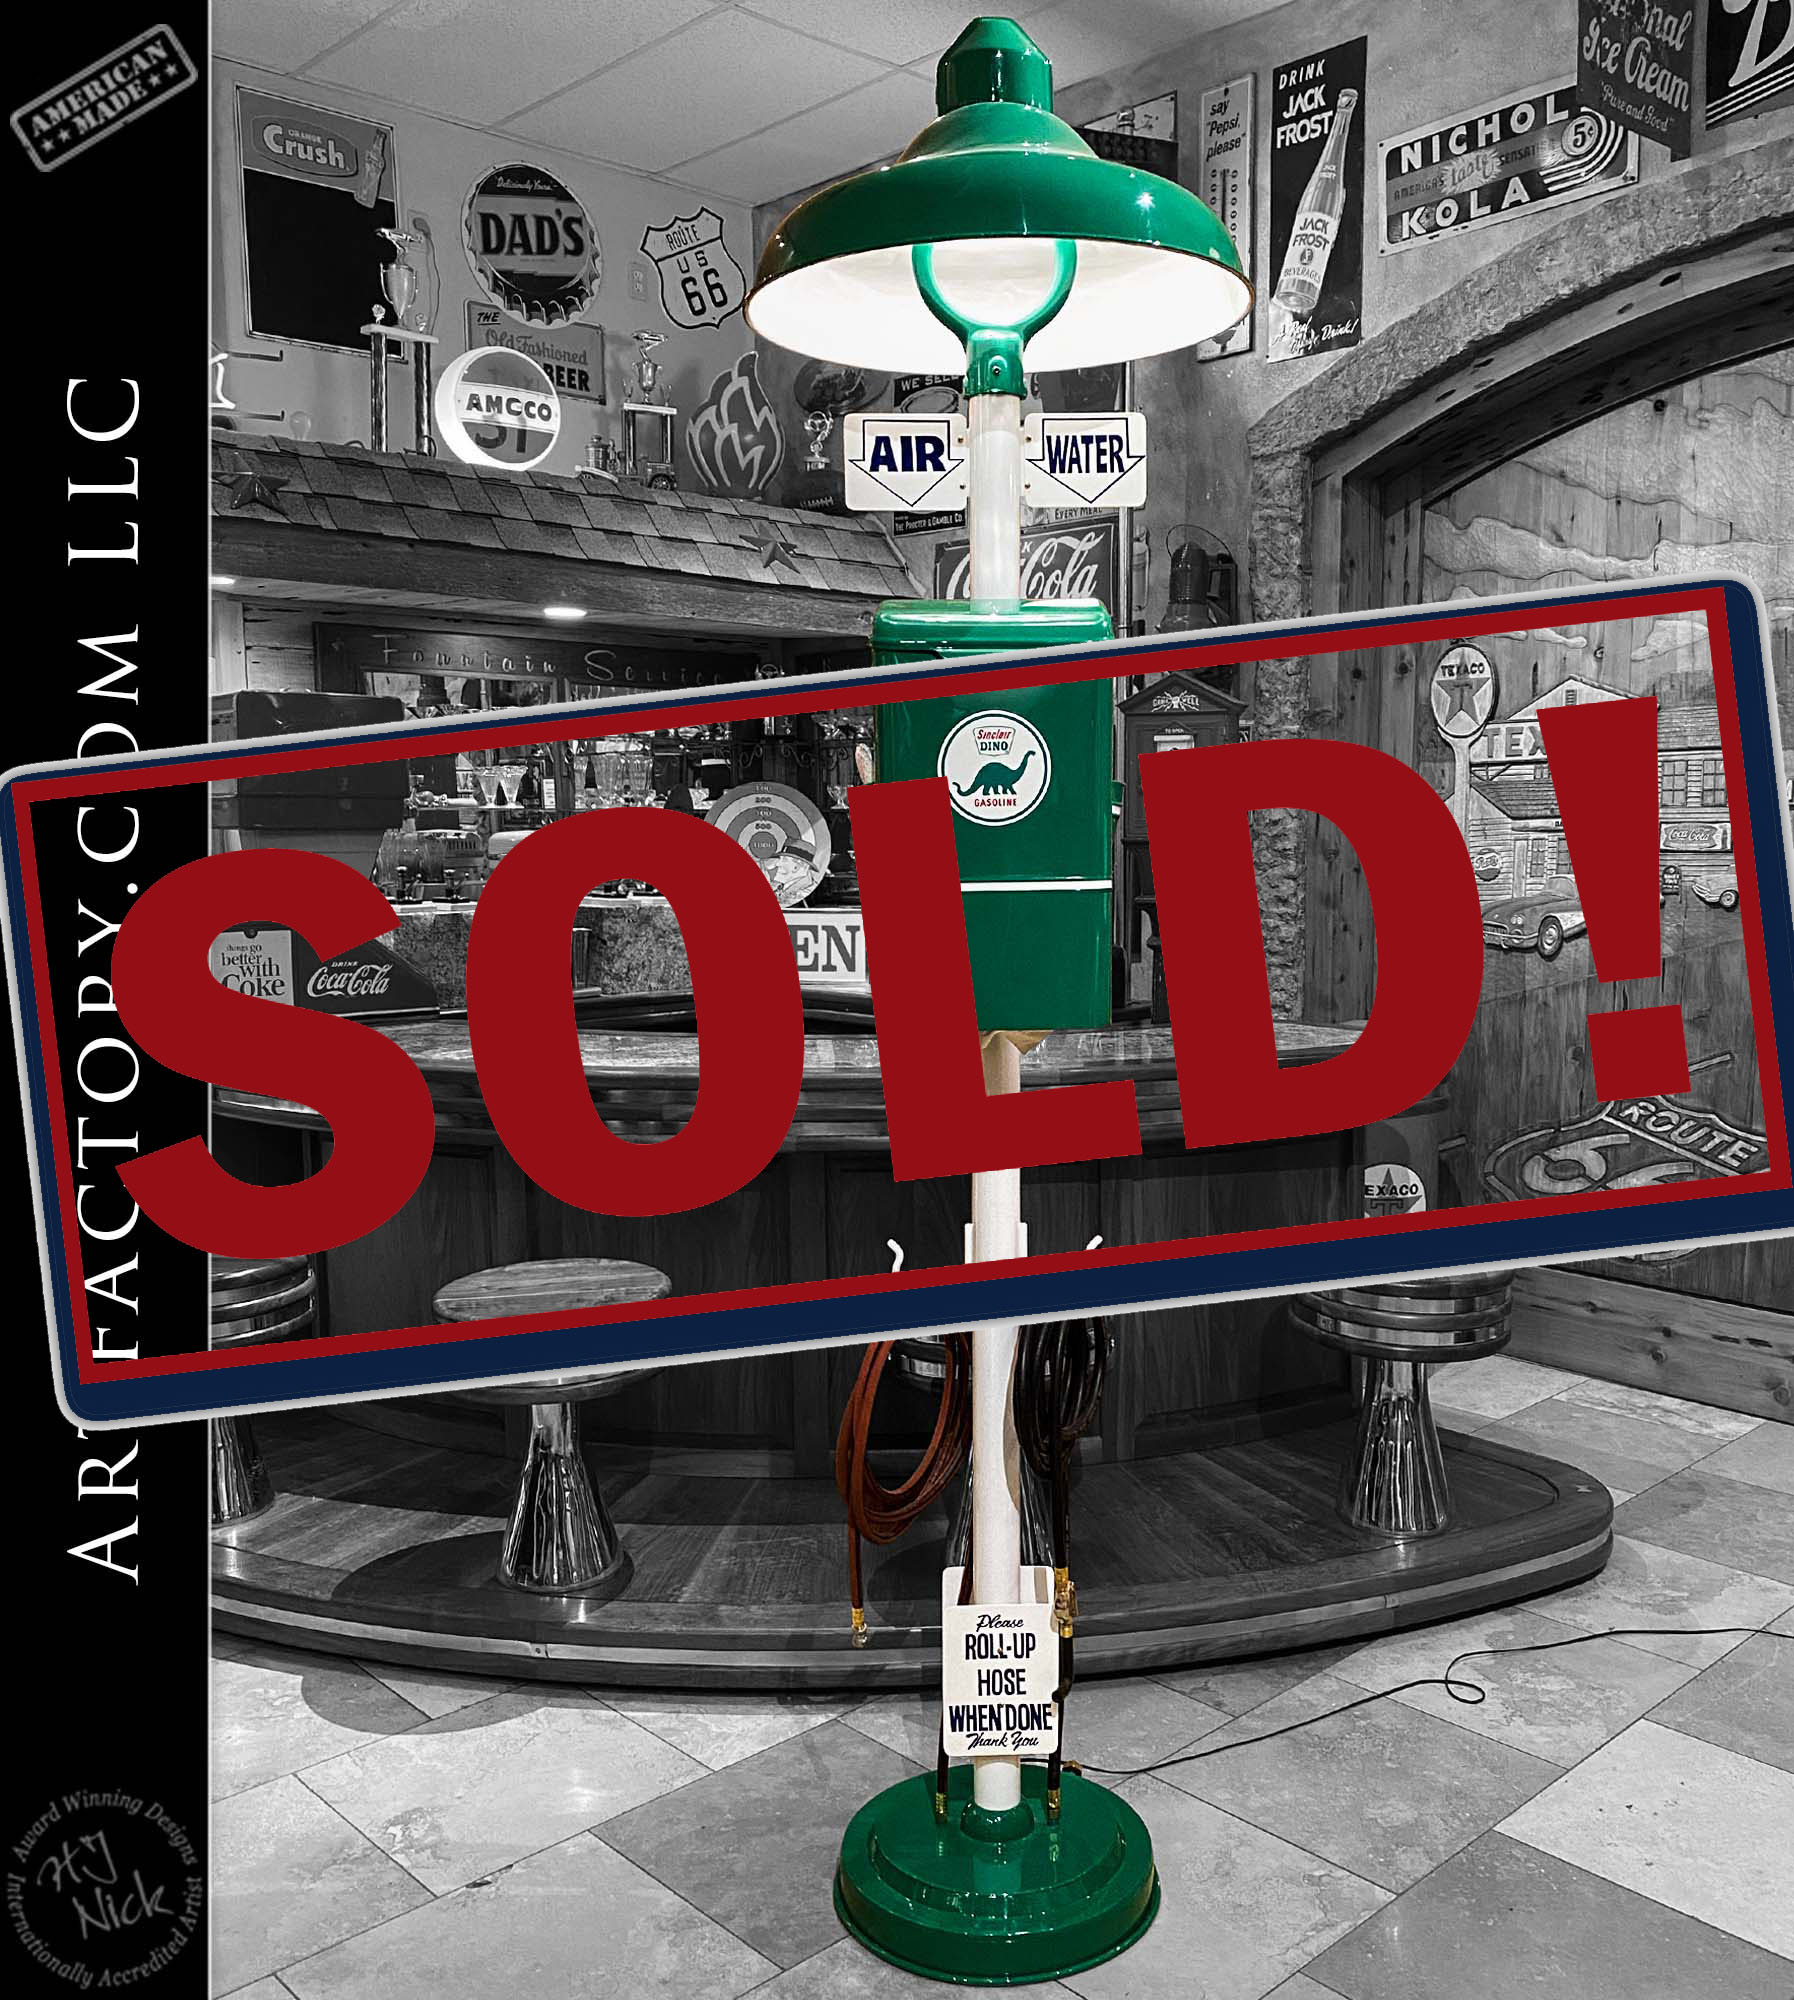 https://mancave.artfactory.com/wp-content/uploads/2017/03/Vintage-Restored-Sinclair-Air-Pole-with-Water-Hose-Island-Light-1-sold.jpg